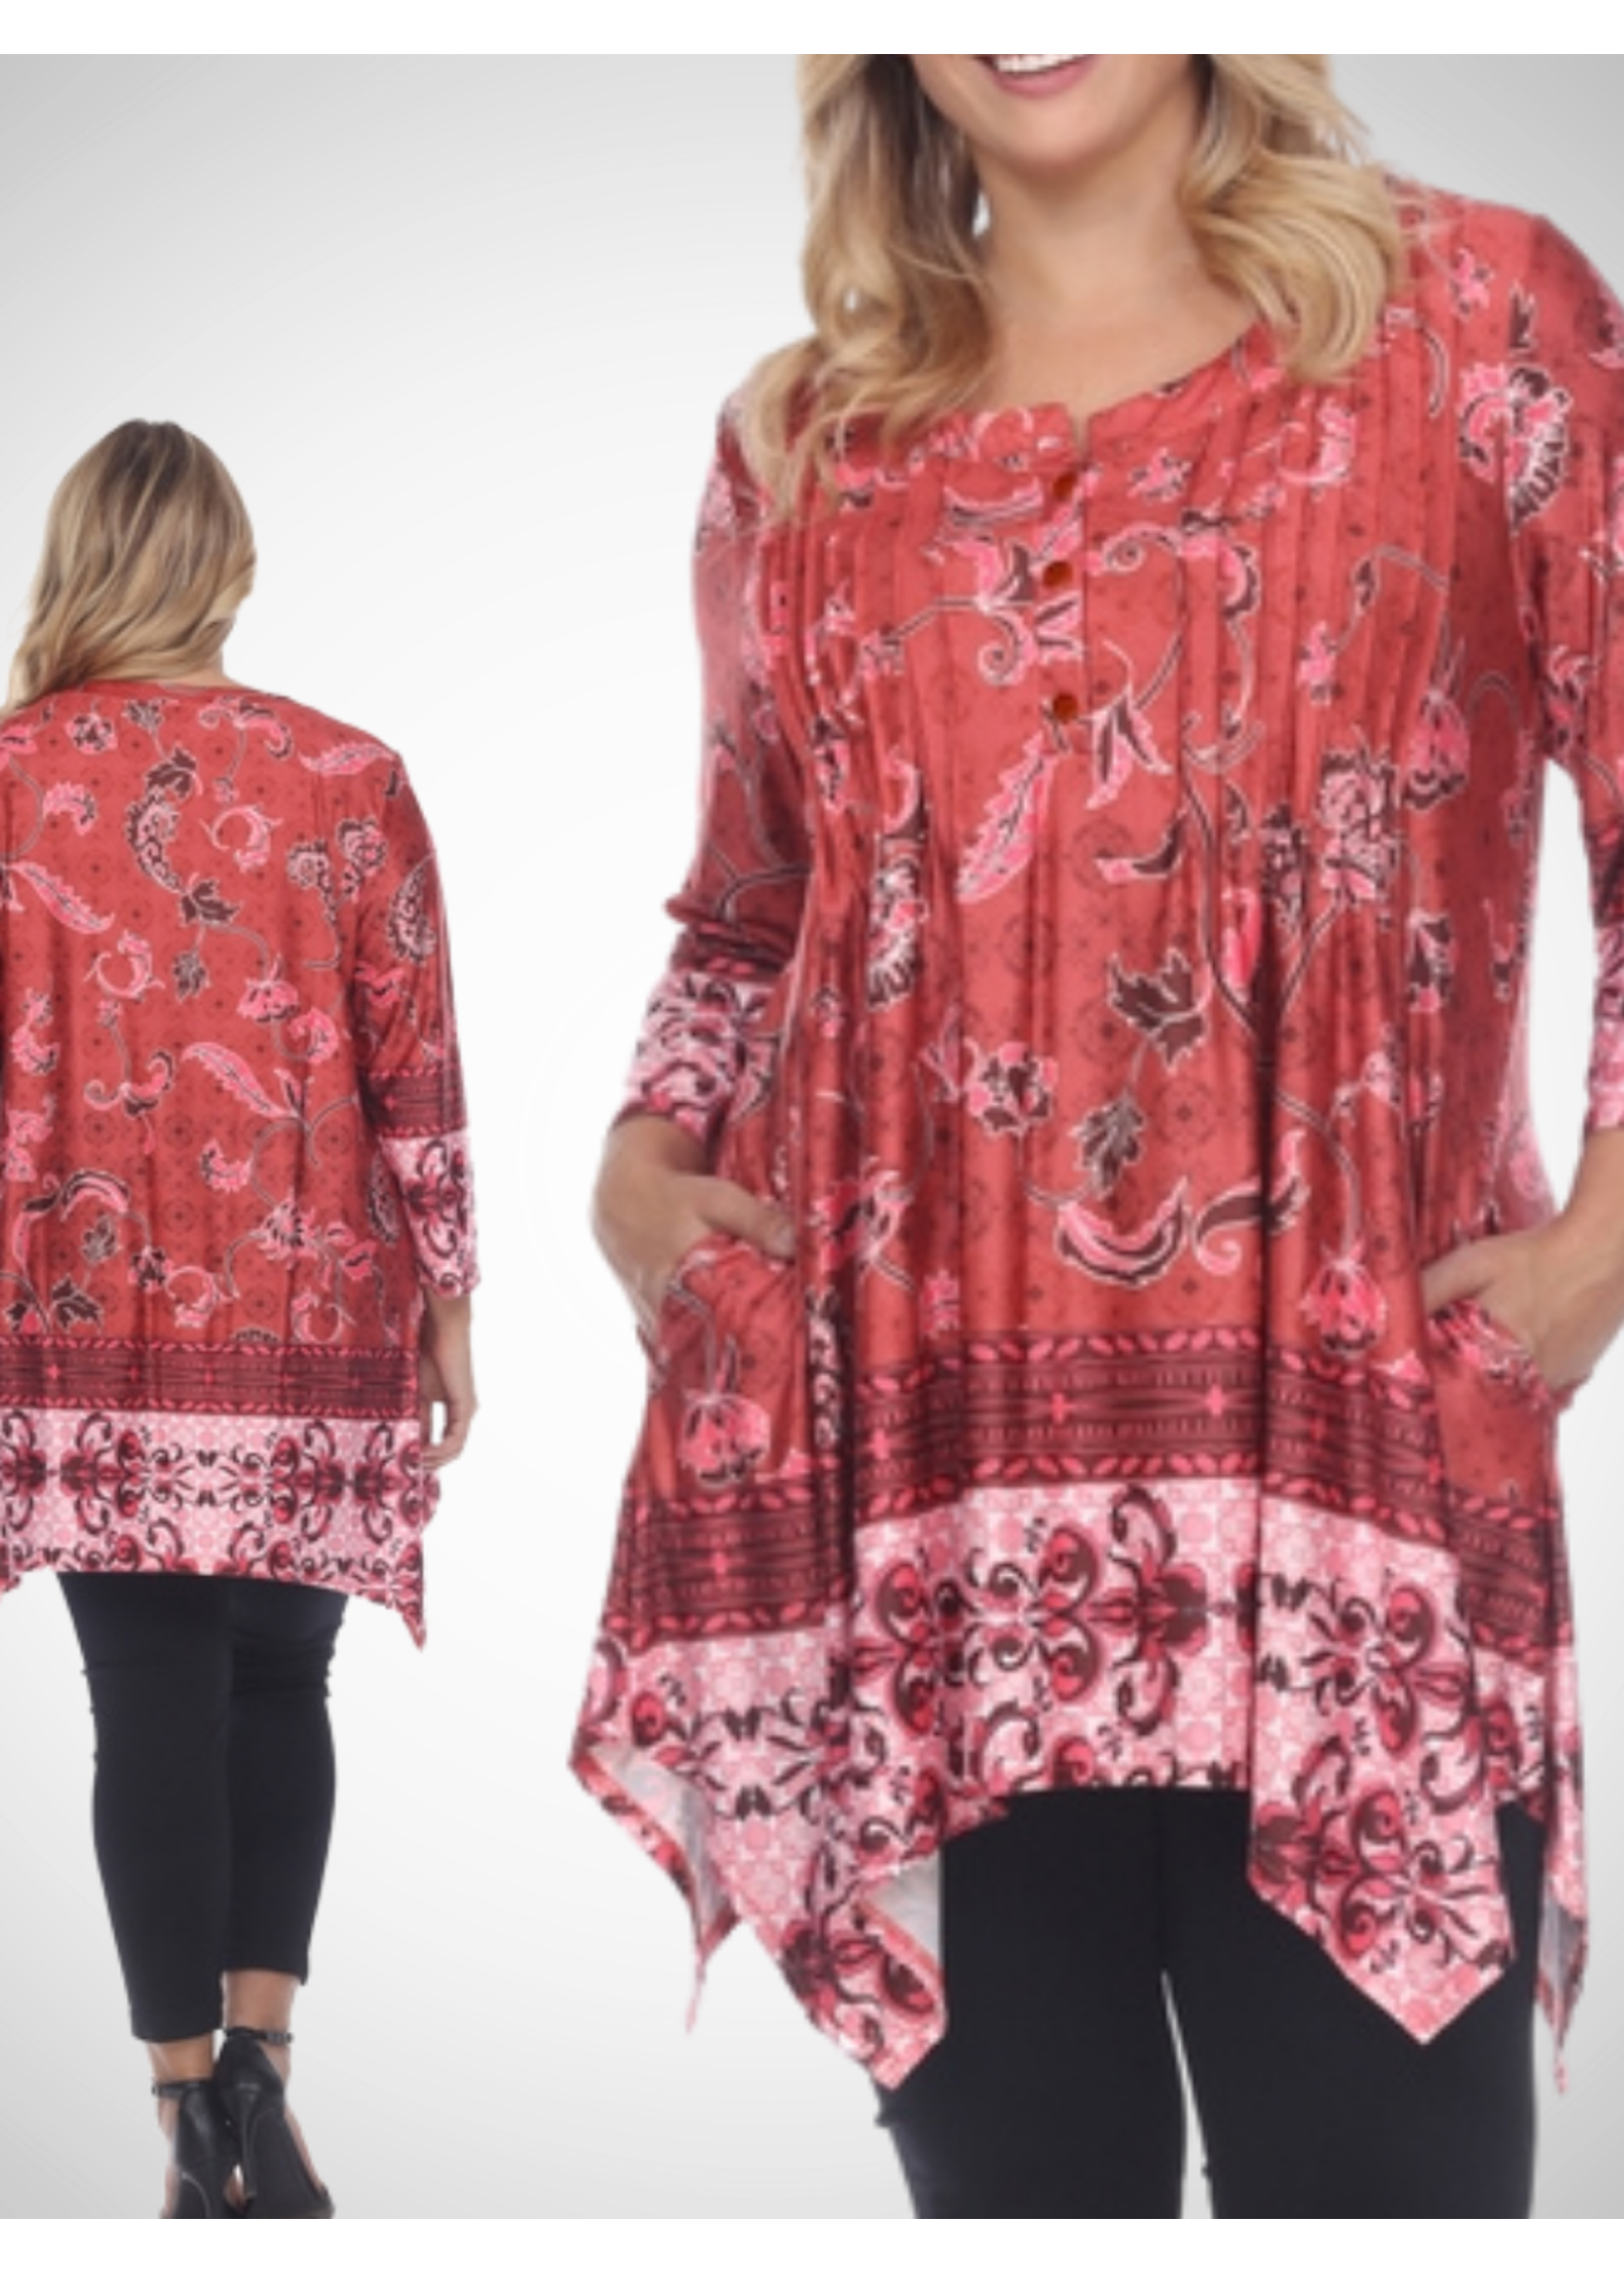 Plus Size Victorian Print Tunic Top with Pockets